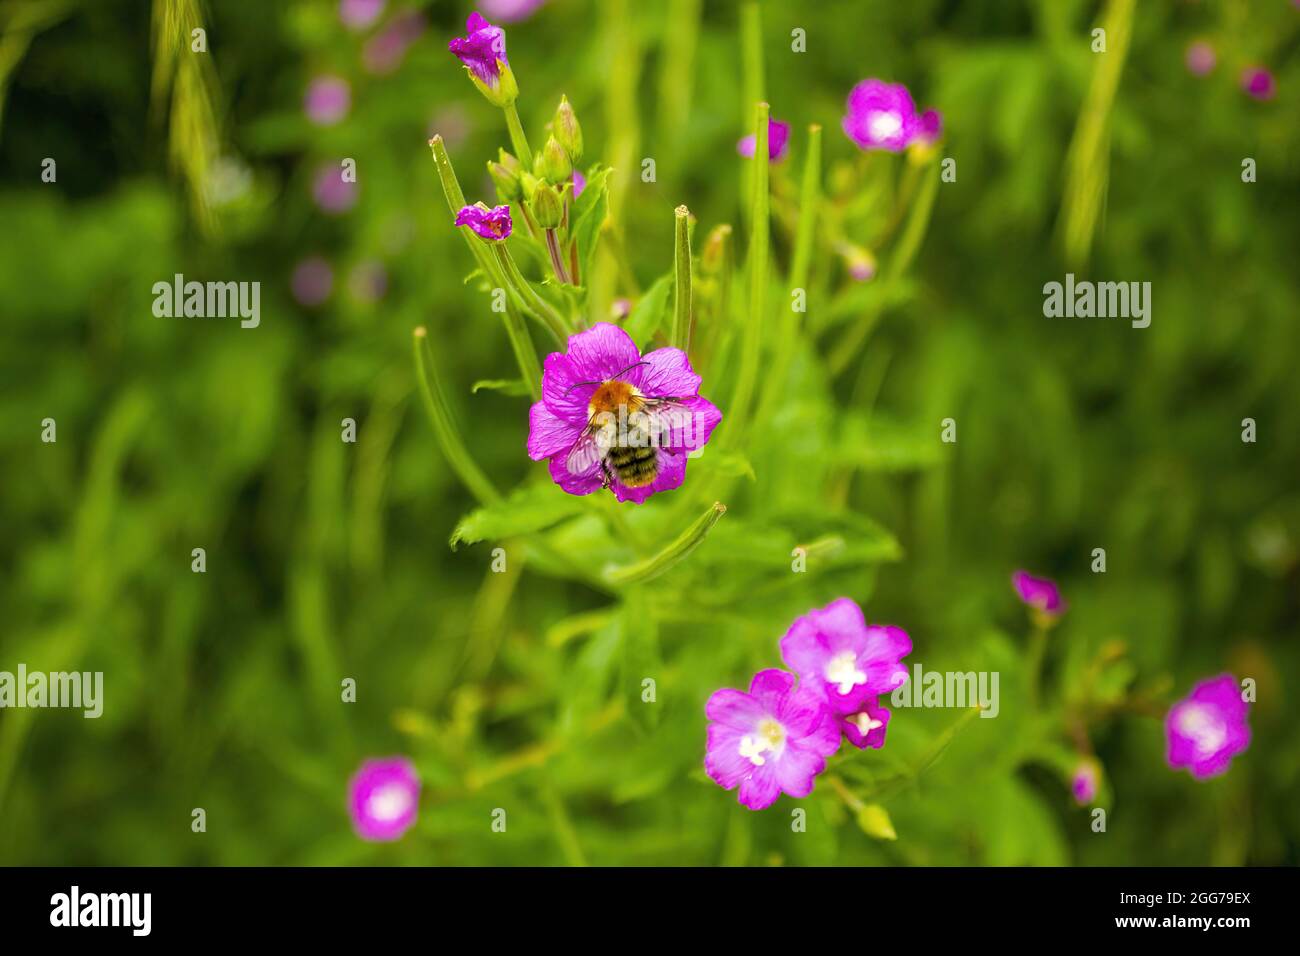 A bee sipping nectar from a pink Calandrinia flower in the meadow Stock Photo